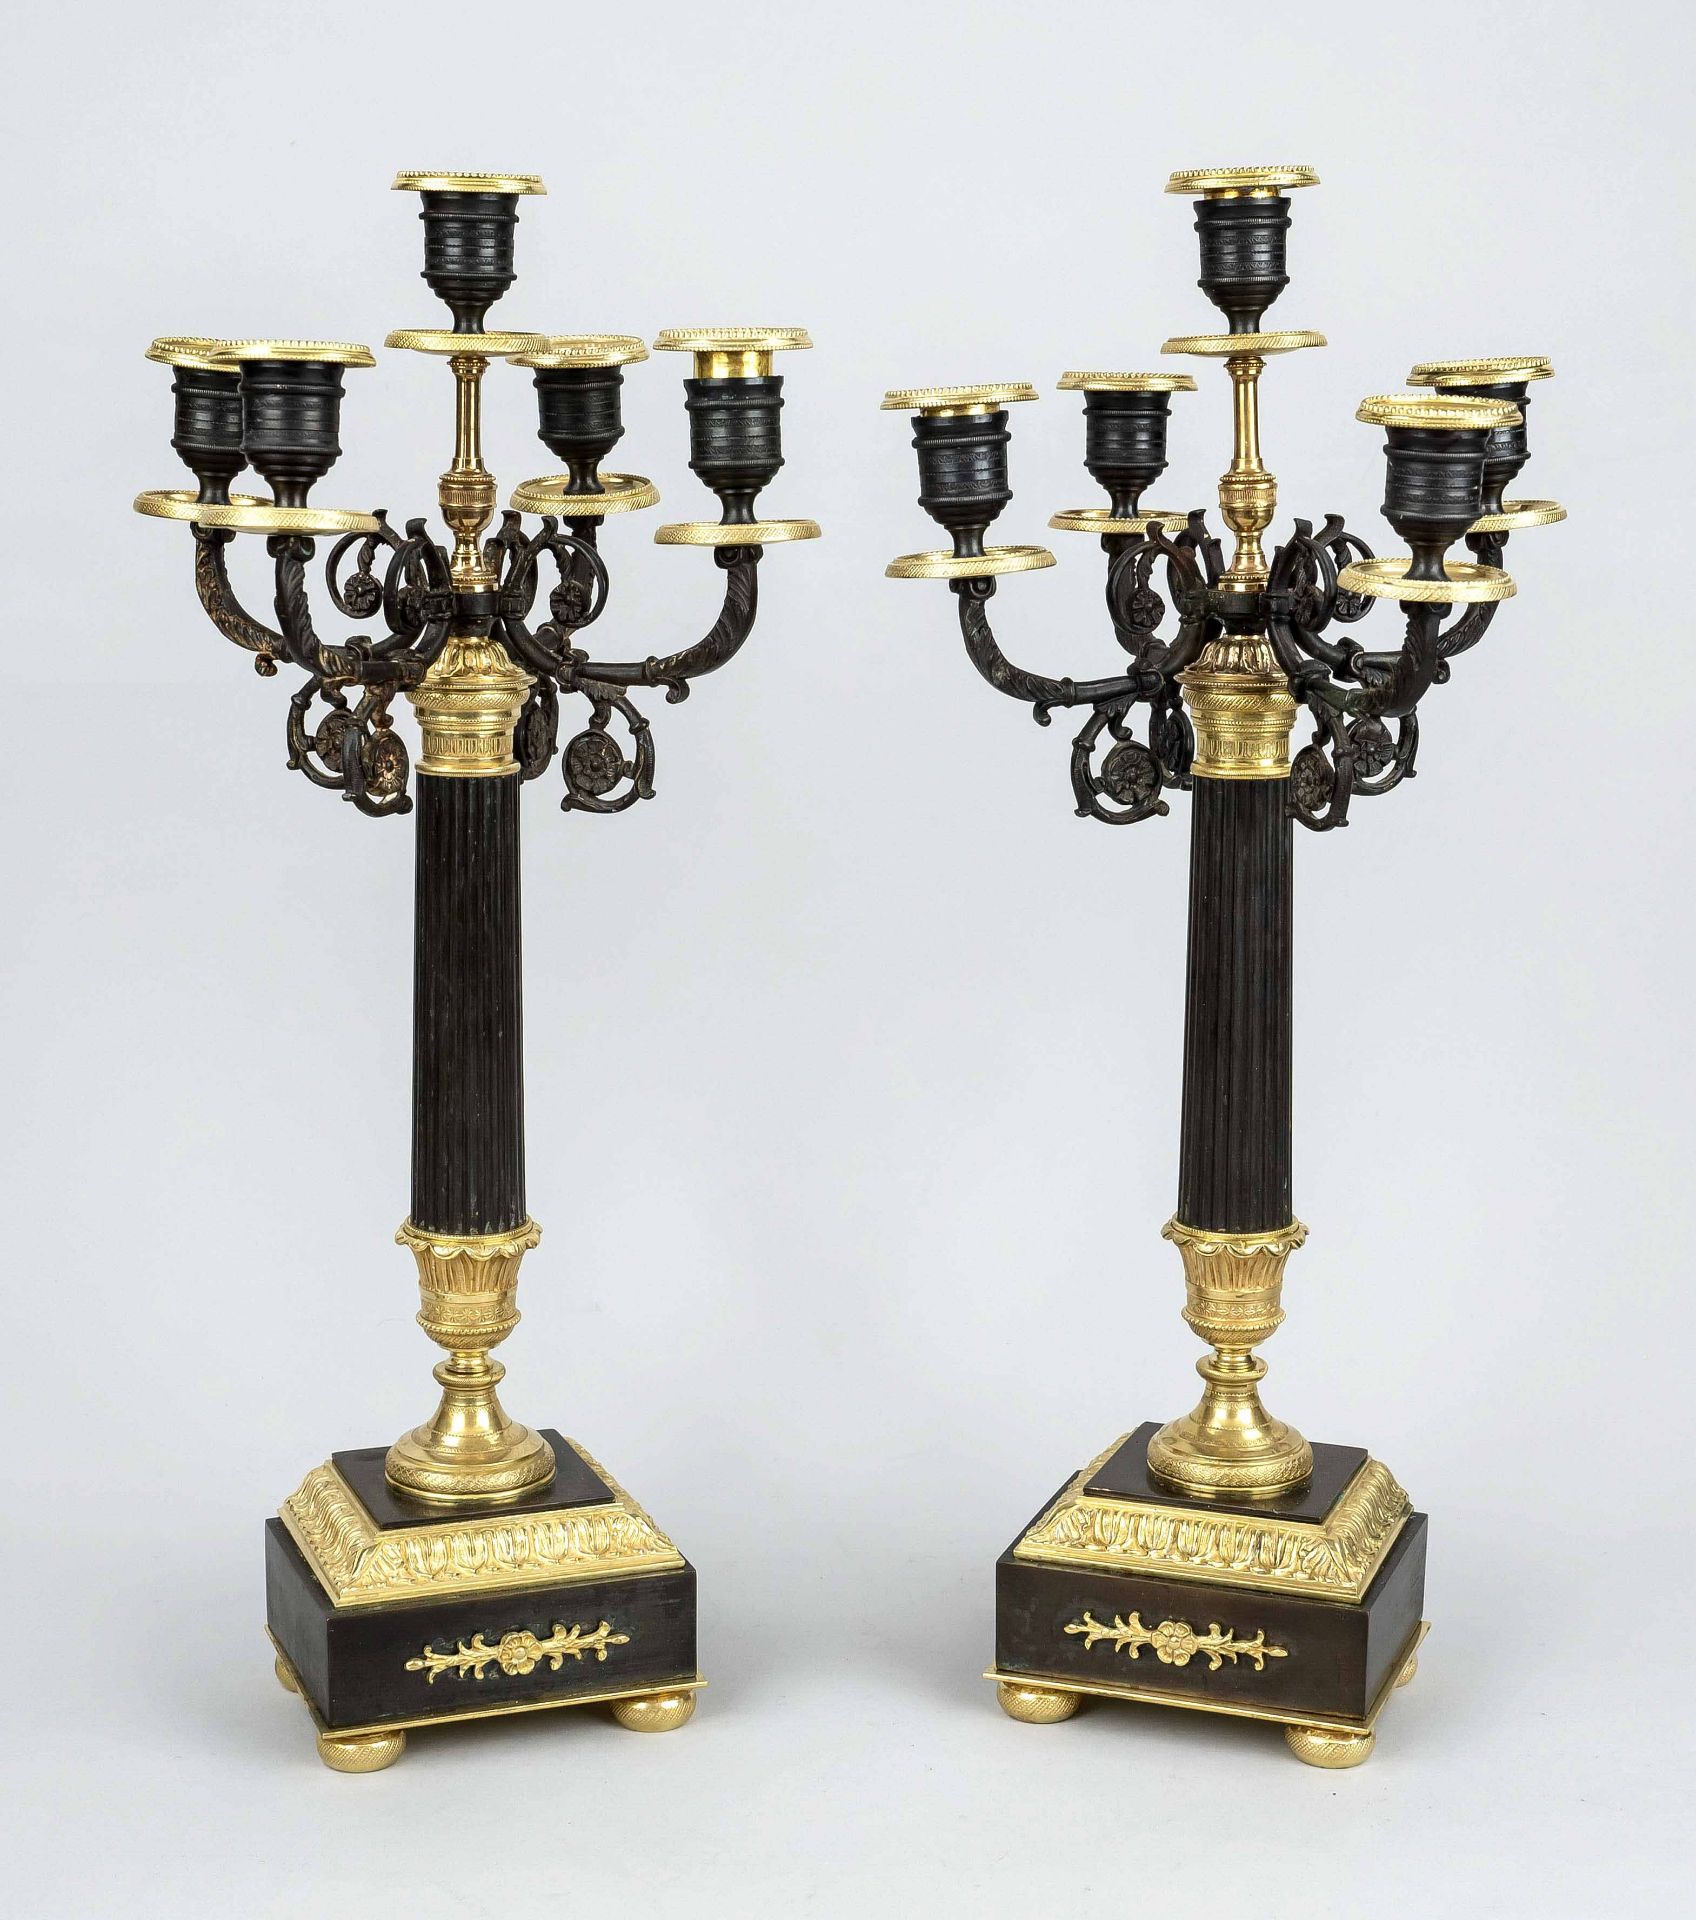 Pair of Empire style candlesticks, probably around 1830. Bronze gilded and patinated. Pedestal on